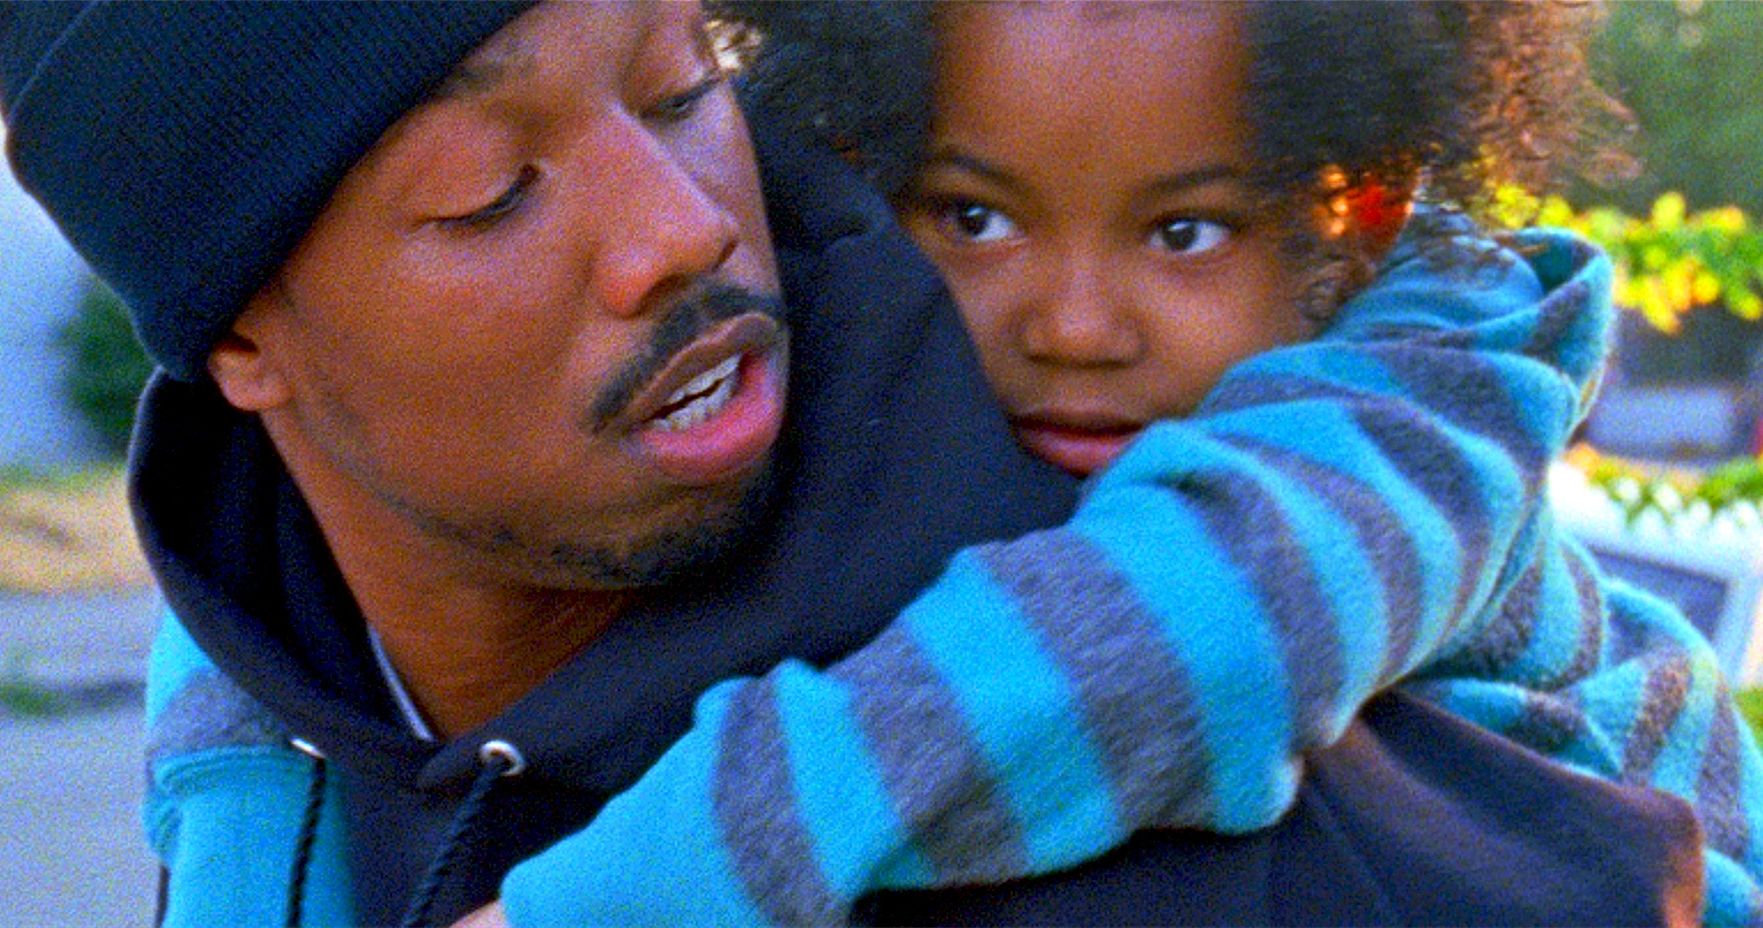 Oscar Grant and his daughter in Fruitvale Station